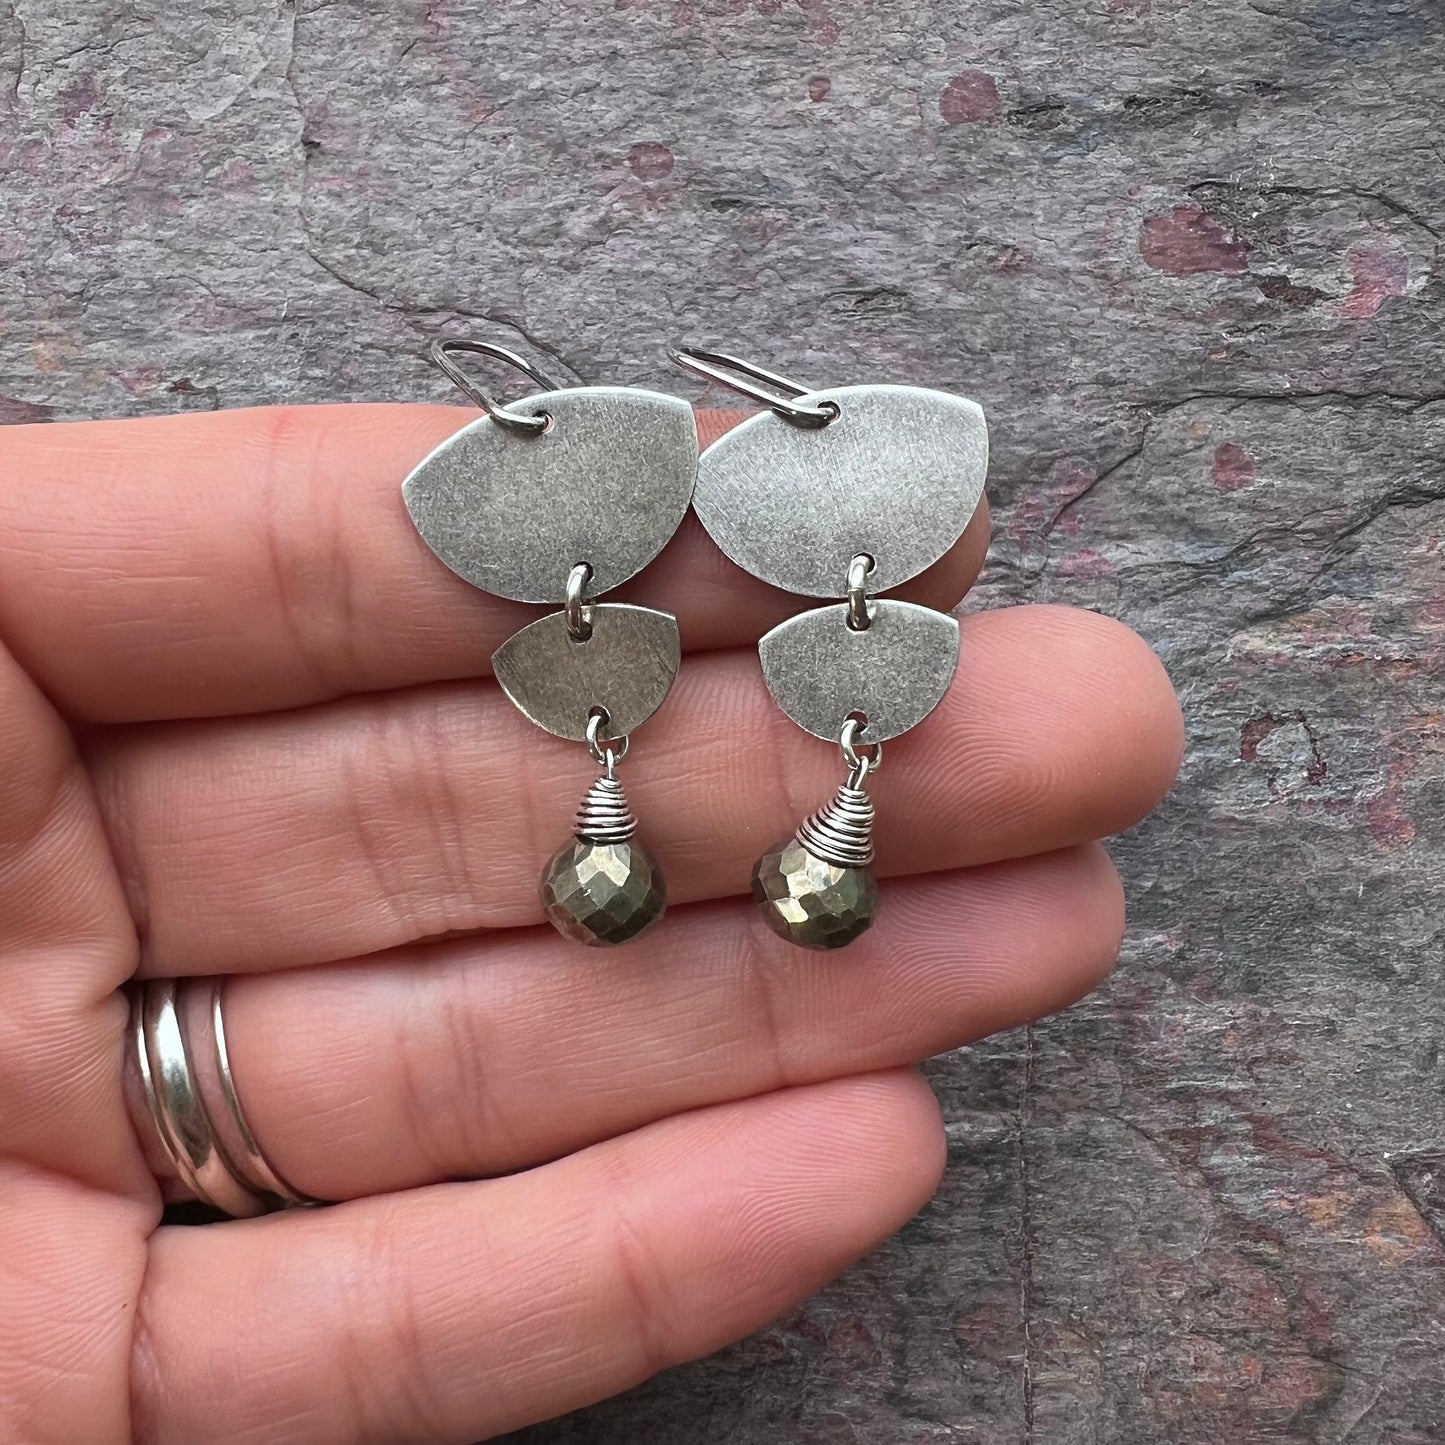 Pyrite Sterling Silver Earrings - Faceted Pyrite Briolettes on Curved Sterling Silver Discs